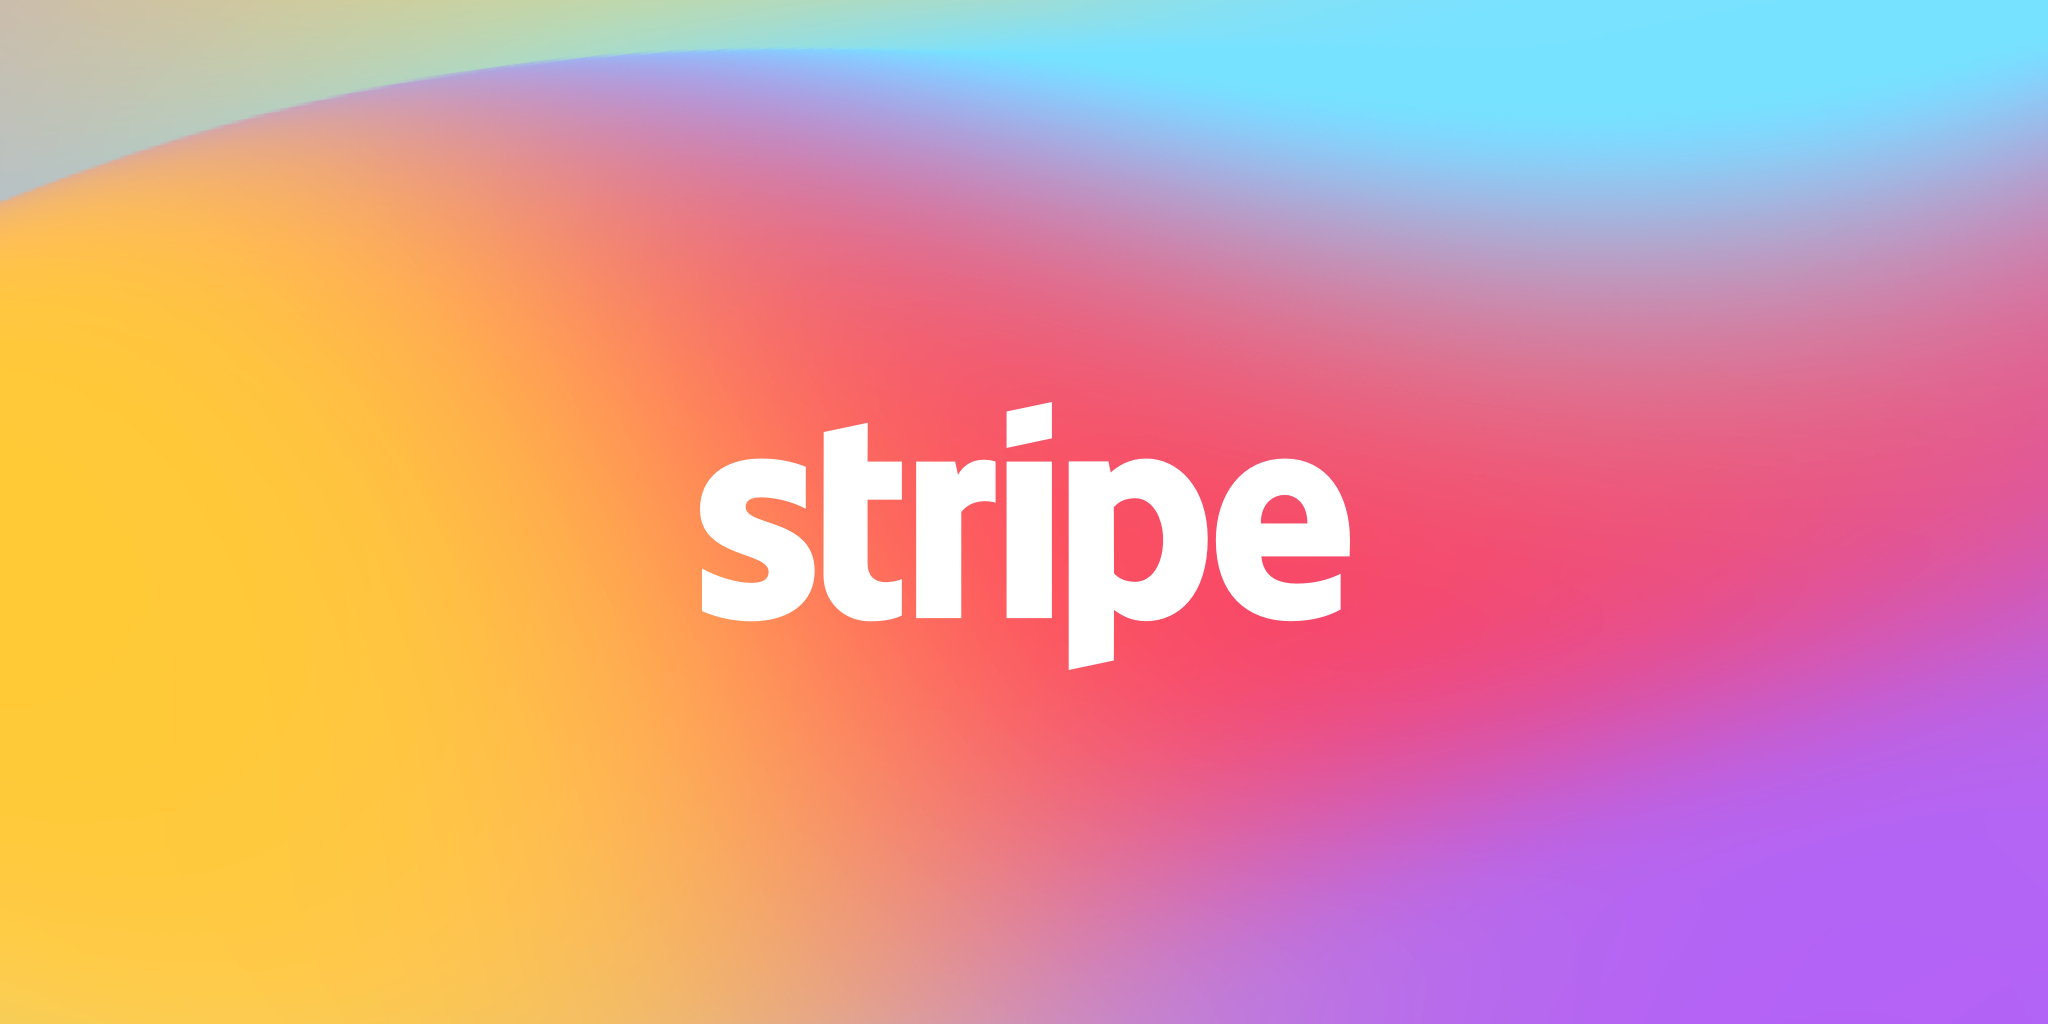 Stripe: Online payment processing for internet businesses